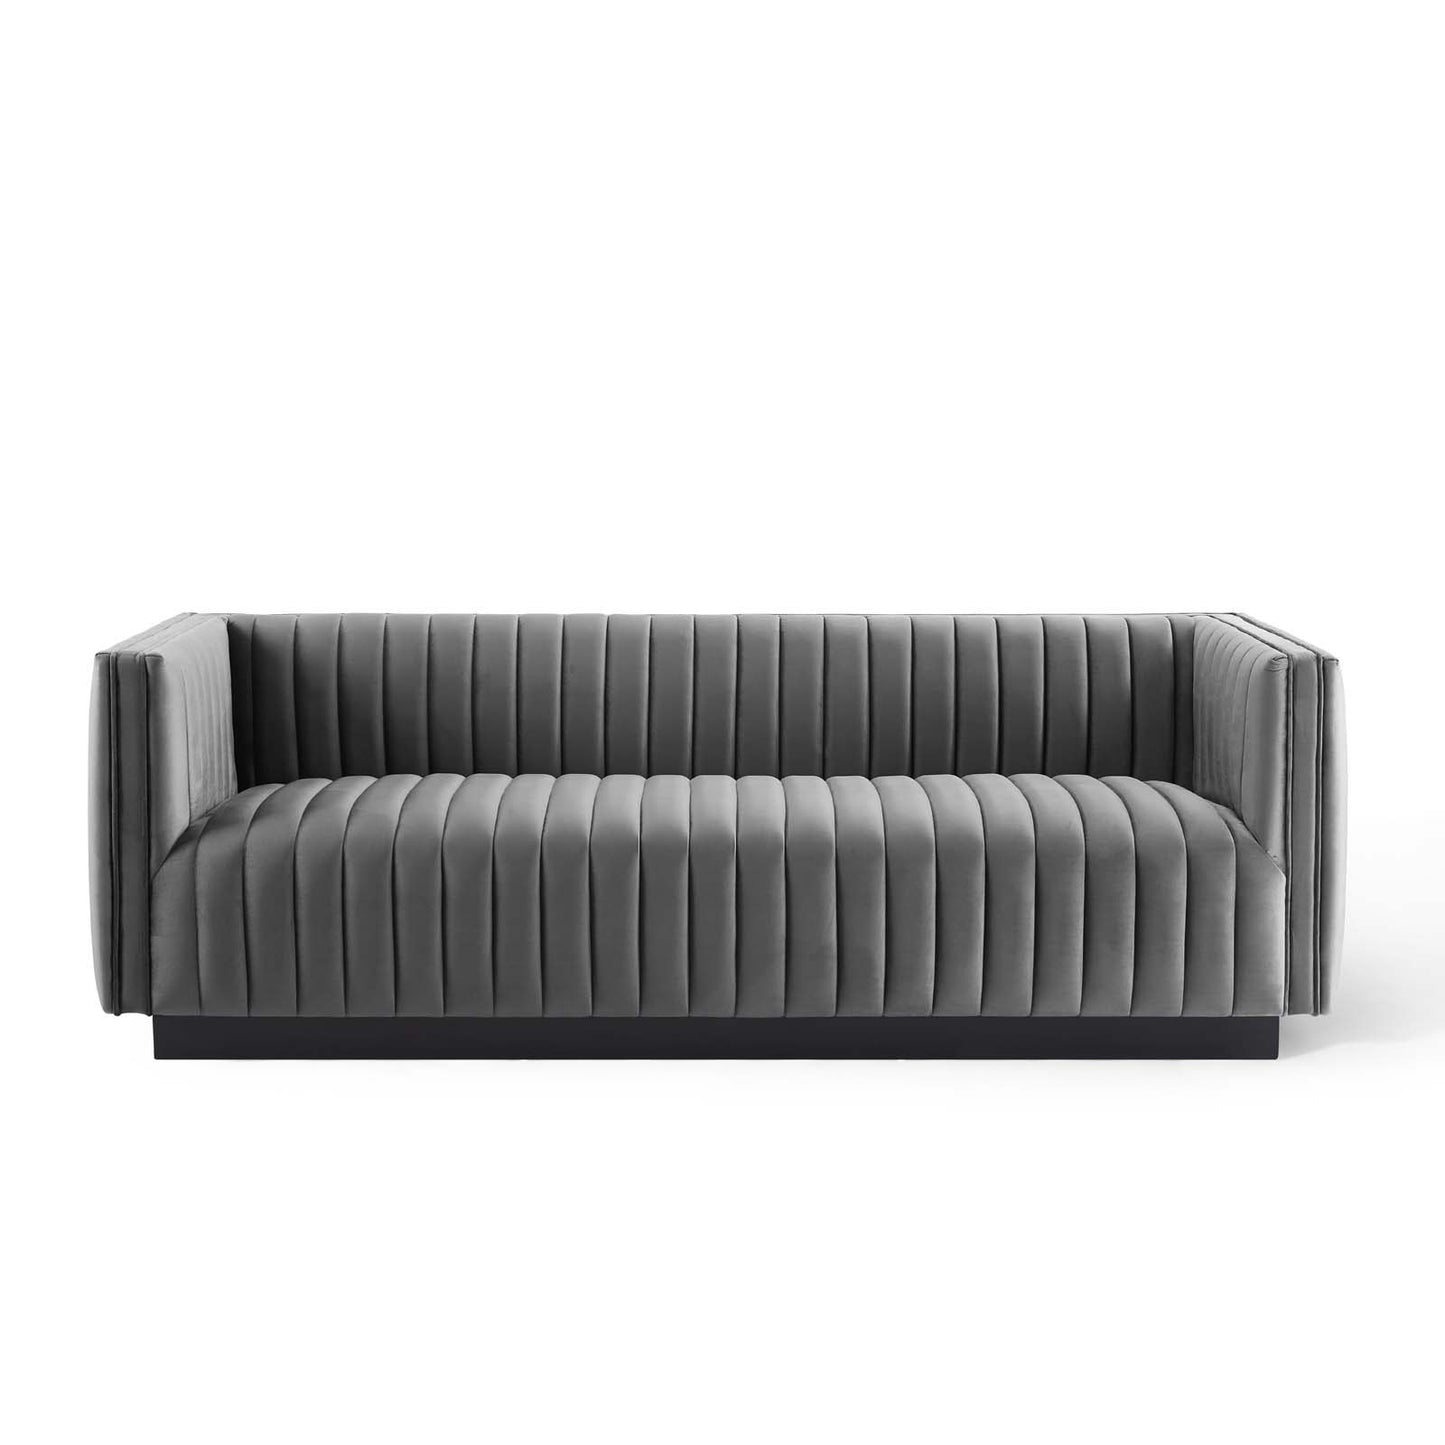 Conjure Channel Tufted Velvet Sofa Gray EEI-3885-GRY